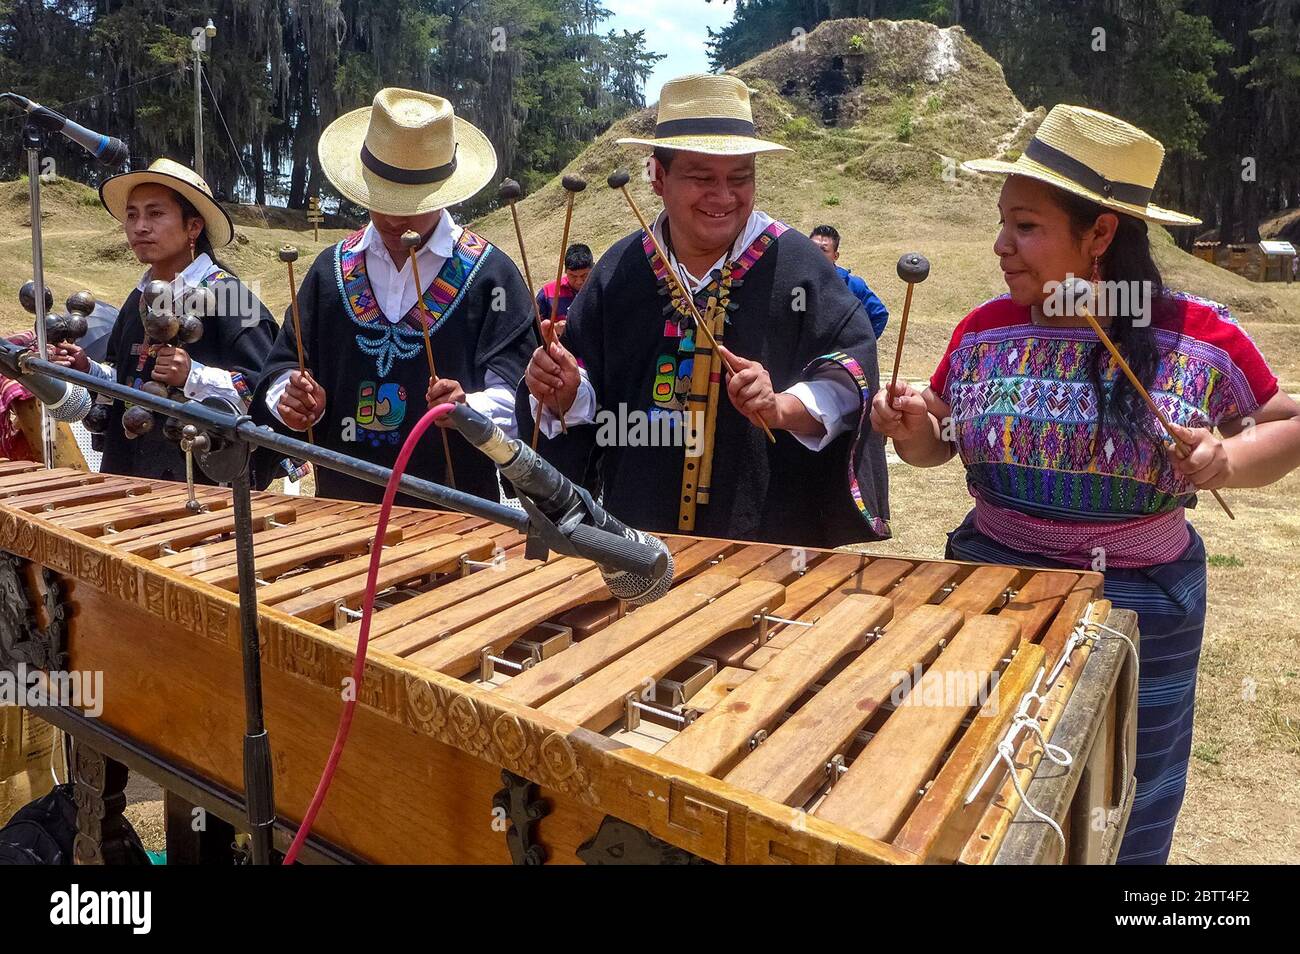 Abraham Bámaca Chalí (second from right), Ixchel Tuyuc Cux (right) and other members of Grupo Xajil, a band from San Juan Comalapa, play the marimba in Guatemala’s Chimaltenango department. The group performs ancestral music for sacred ceremonies, art circles and cultural activities around the world. The name Xajil, in the Mayan Kaqchiquel language, translates to dancing musician.(Norma Bajan Balan, GPJ Guatemala) Stock Photo